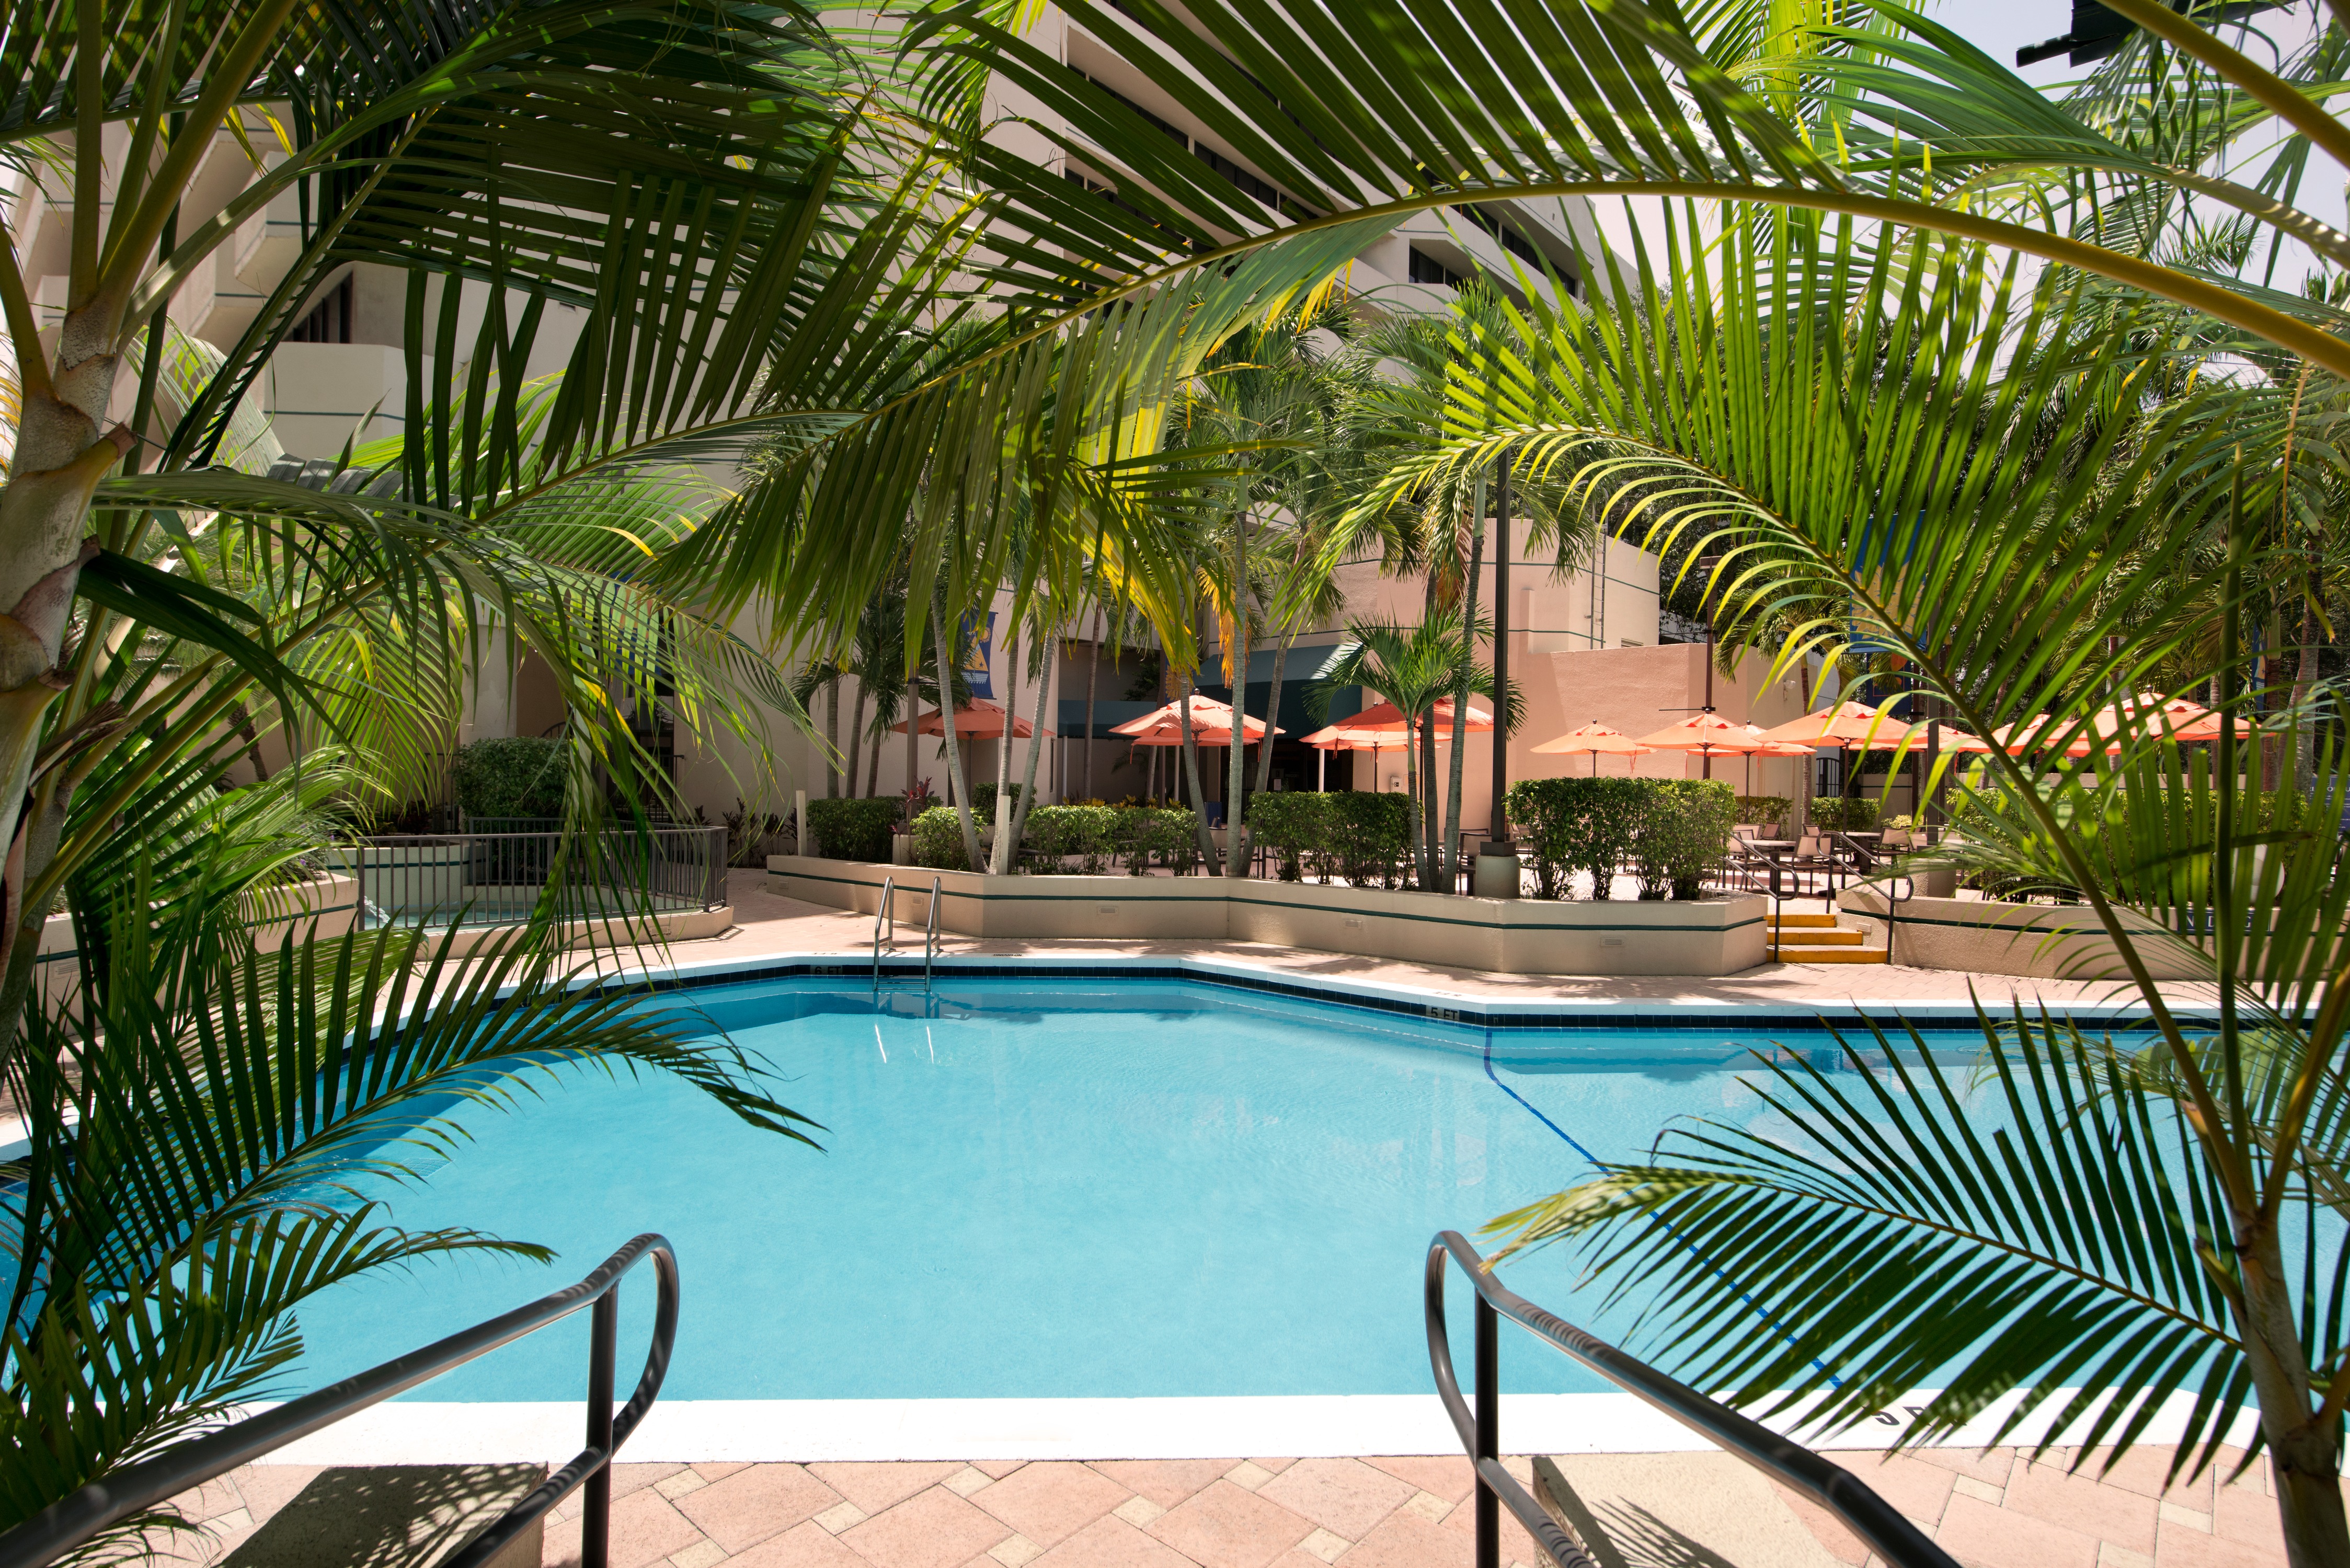 Daytime View of Outdoor Pool and Hotel Exterior Surrounded by Palm Trees